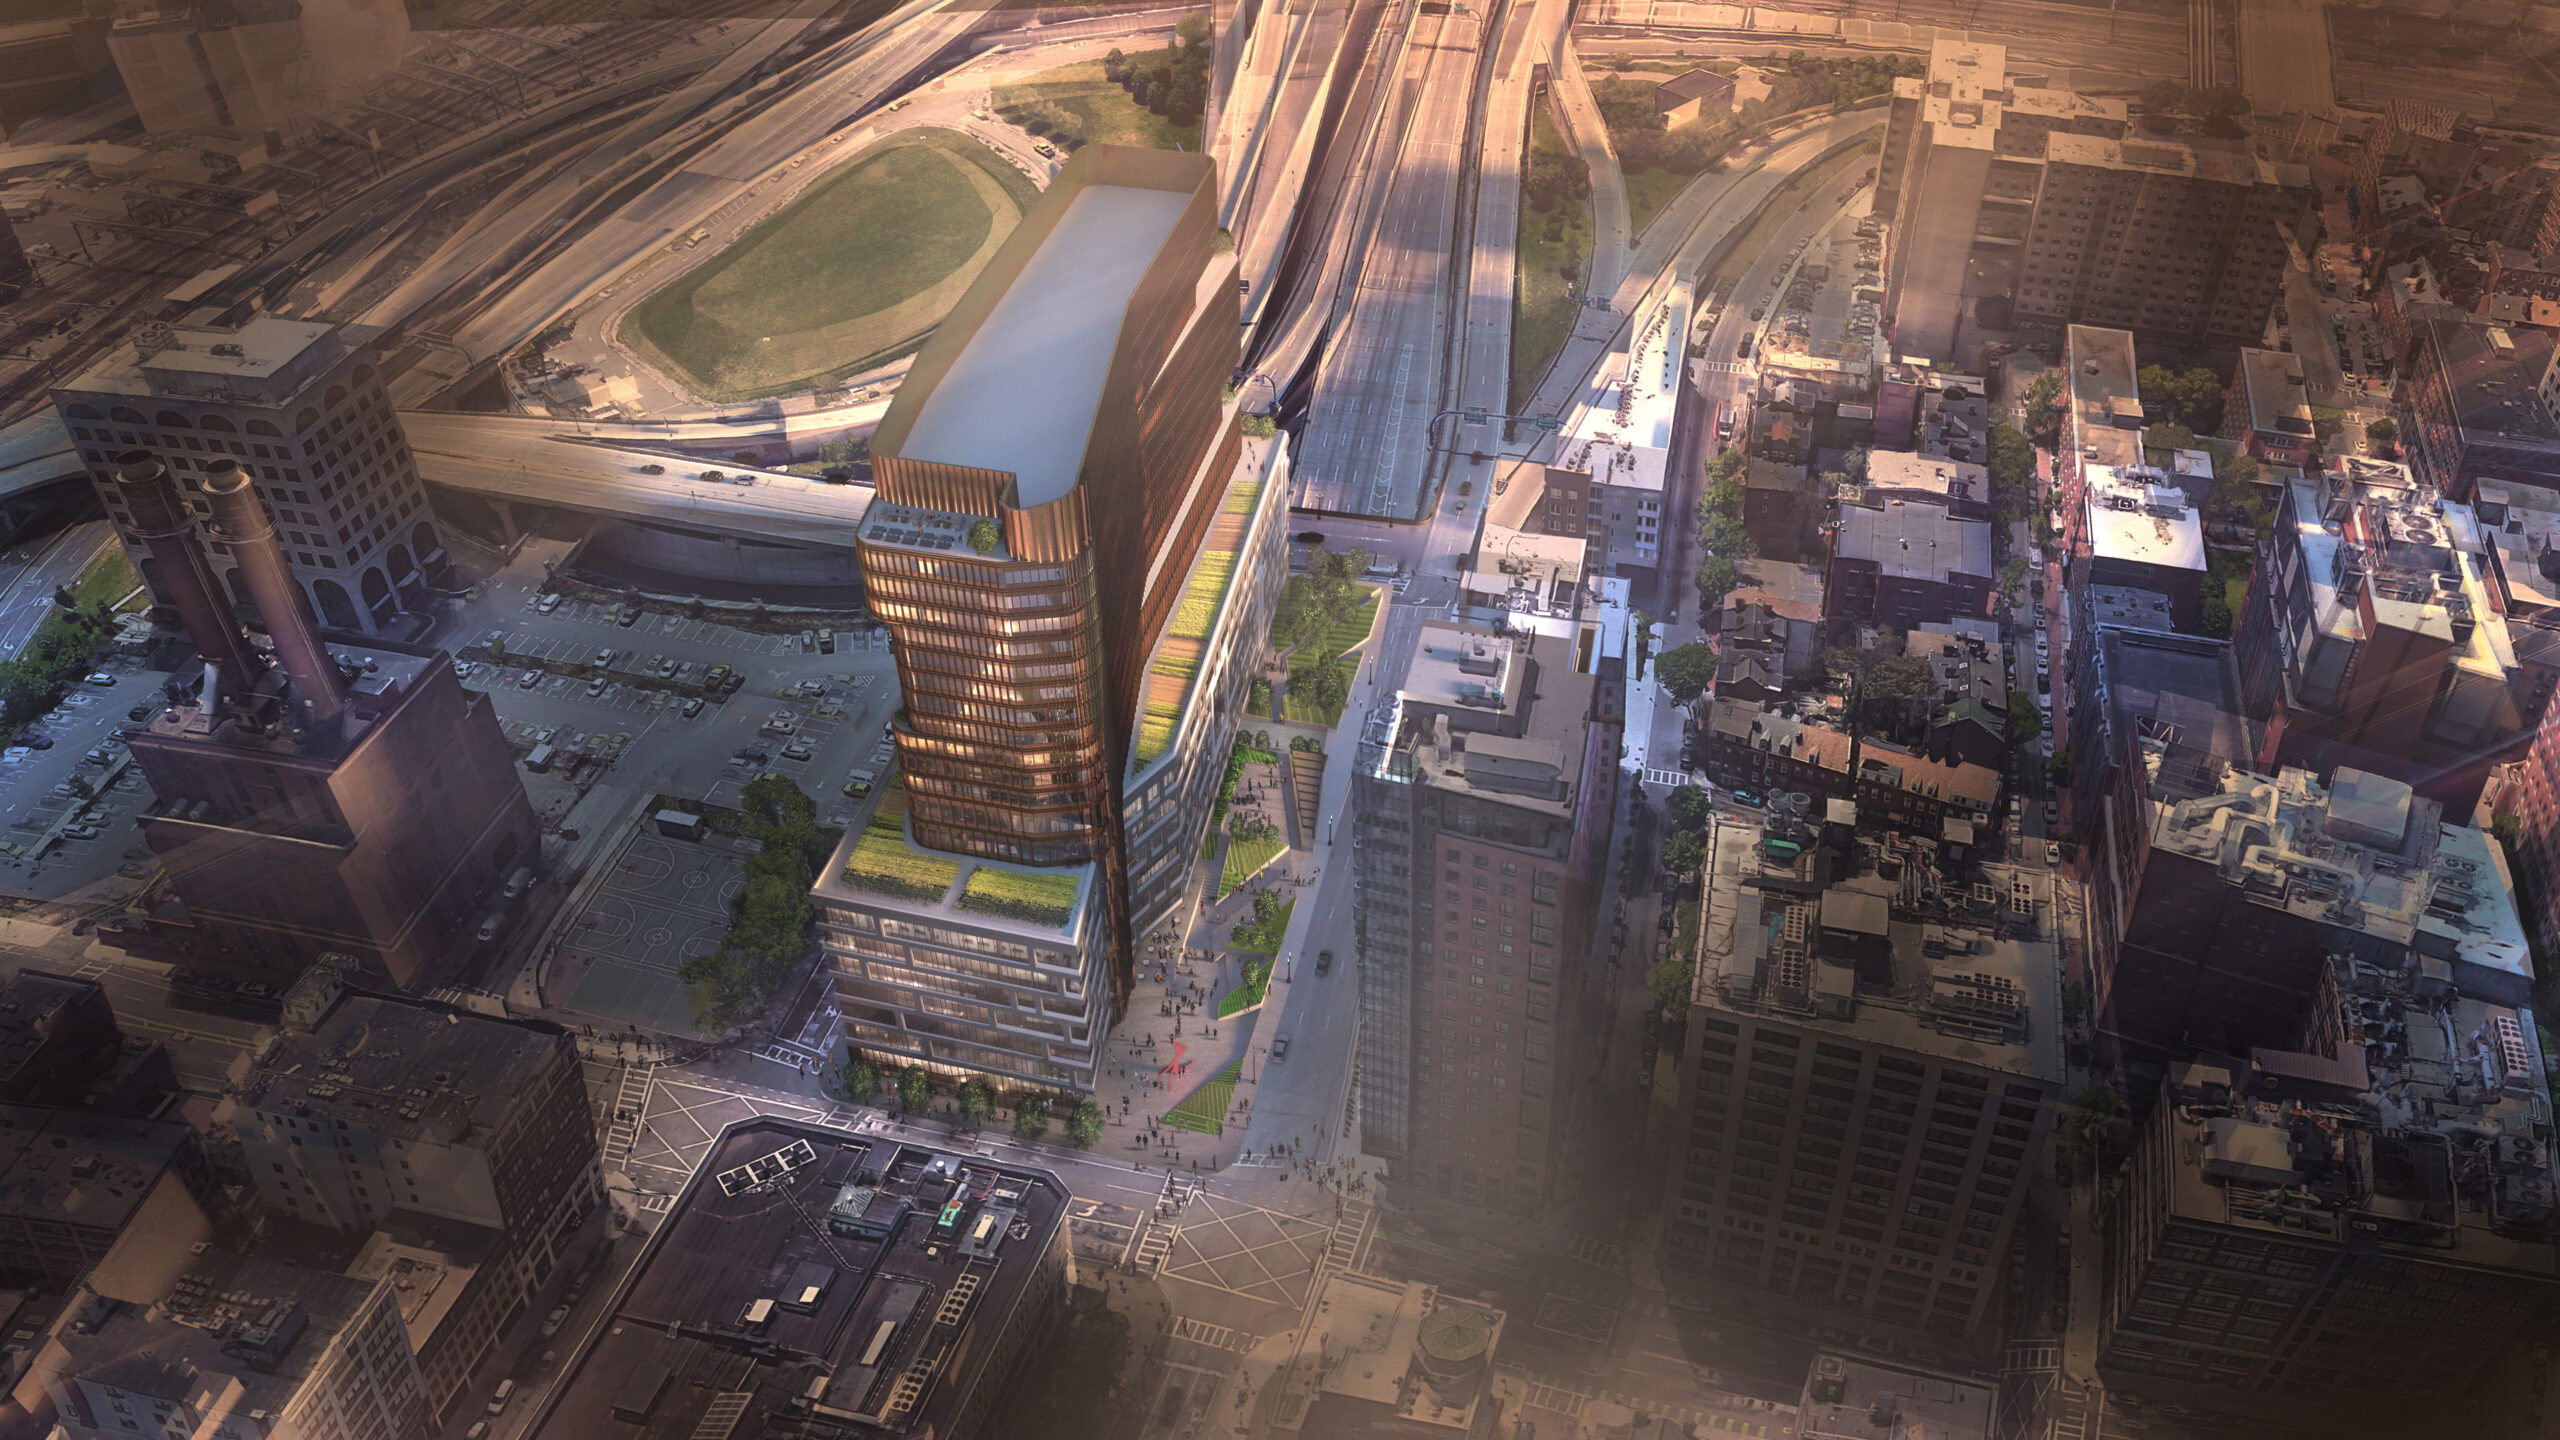 MassDOT selects Zero Greenway team to redevelop Parcel 25 in Boston